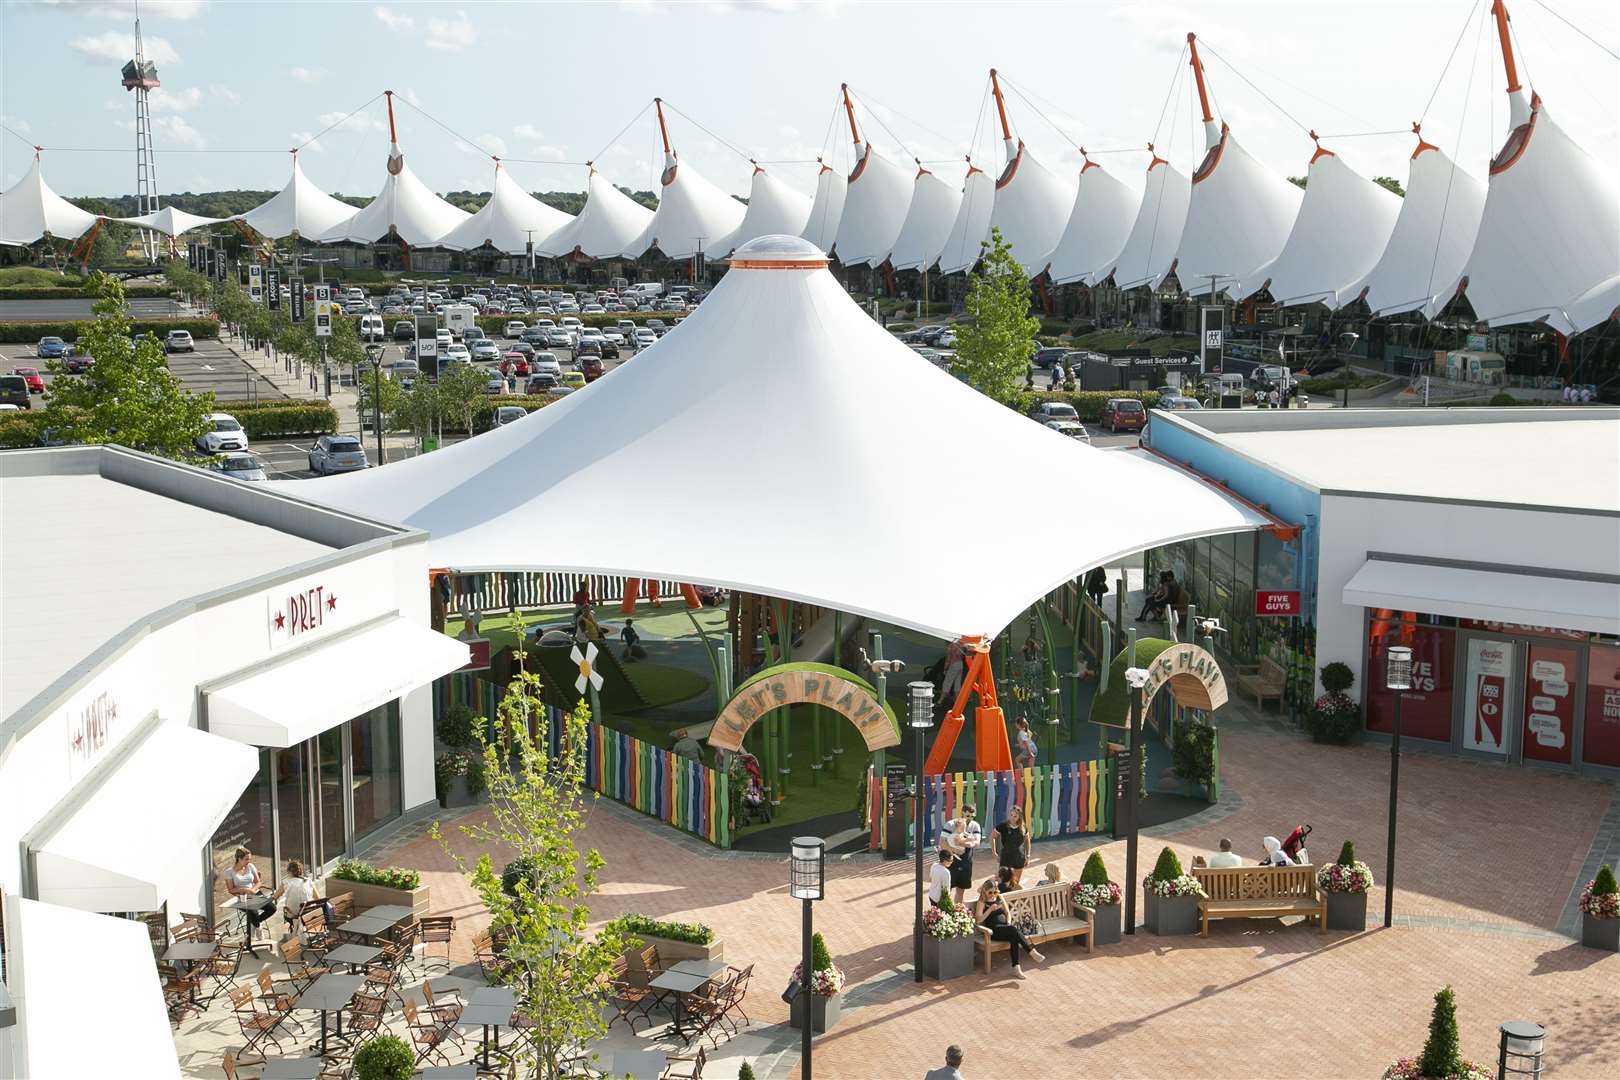 The Ashford Designer Outlet's already seen half of its extension opened